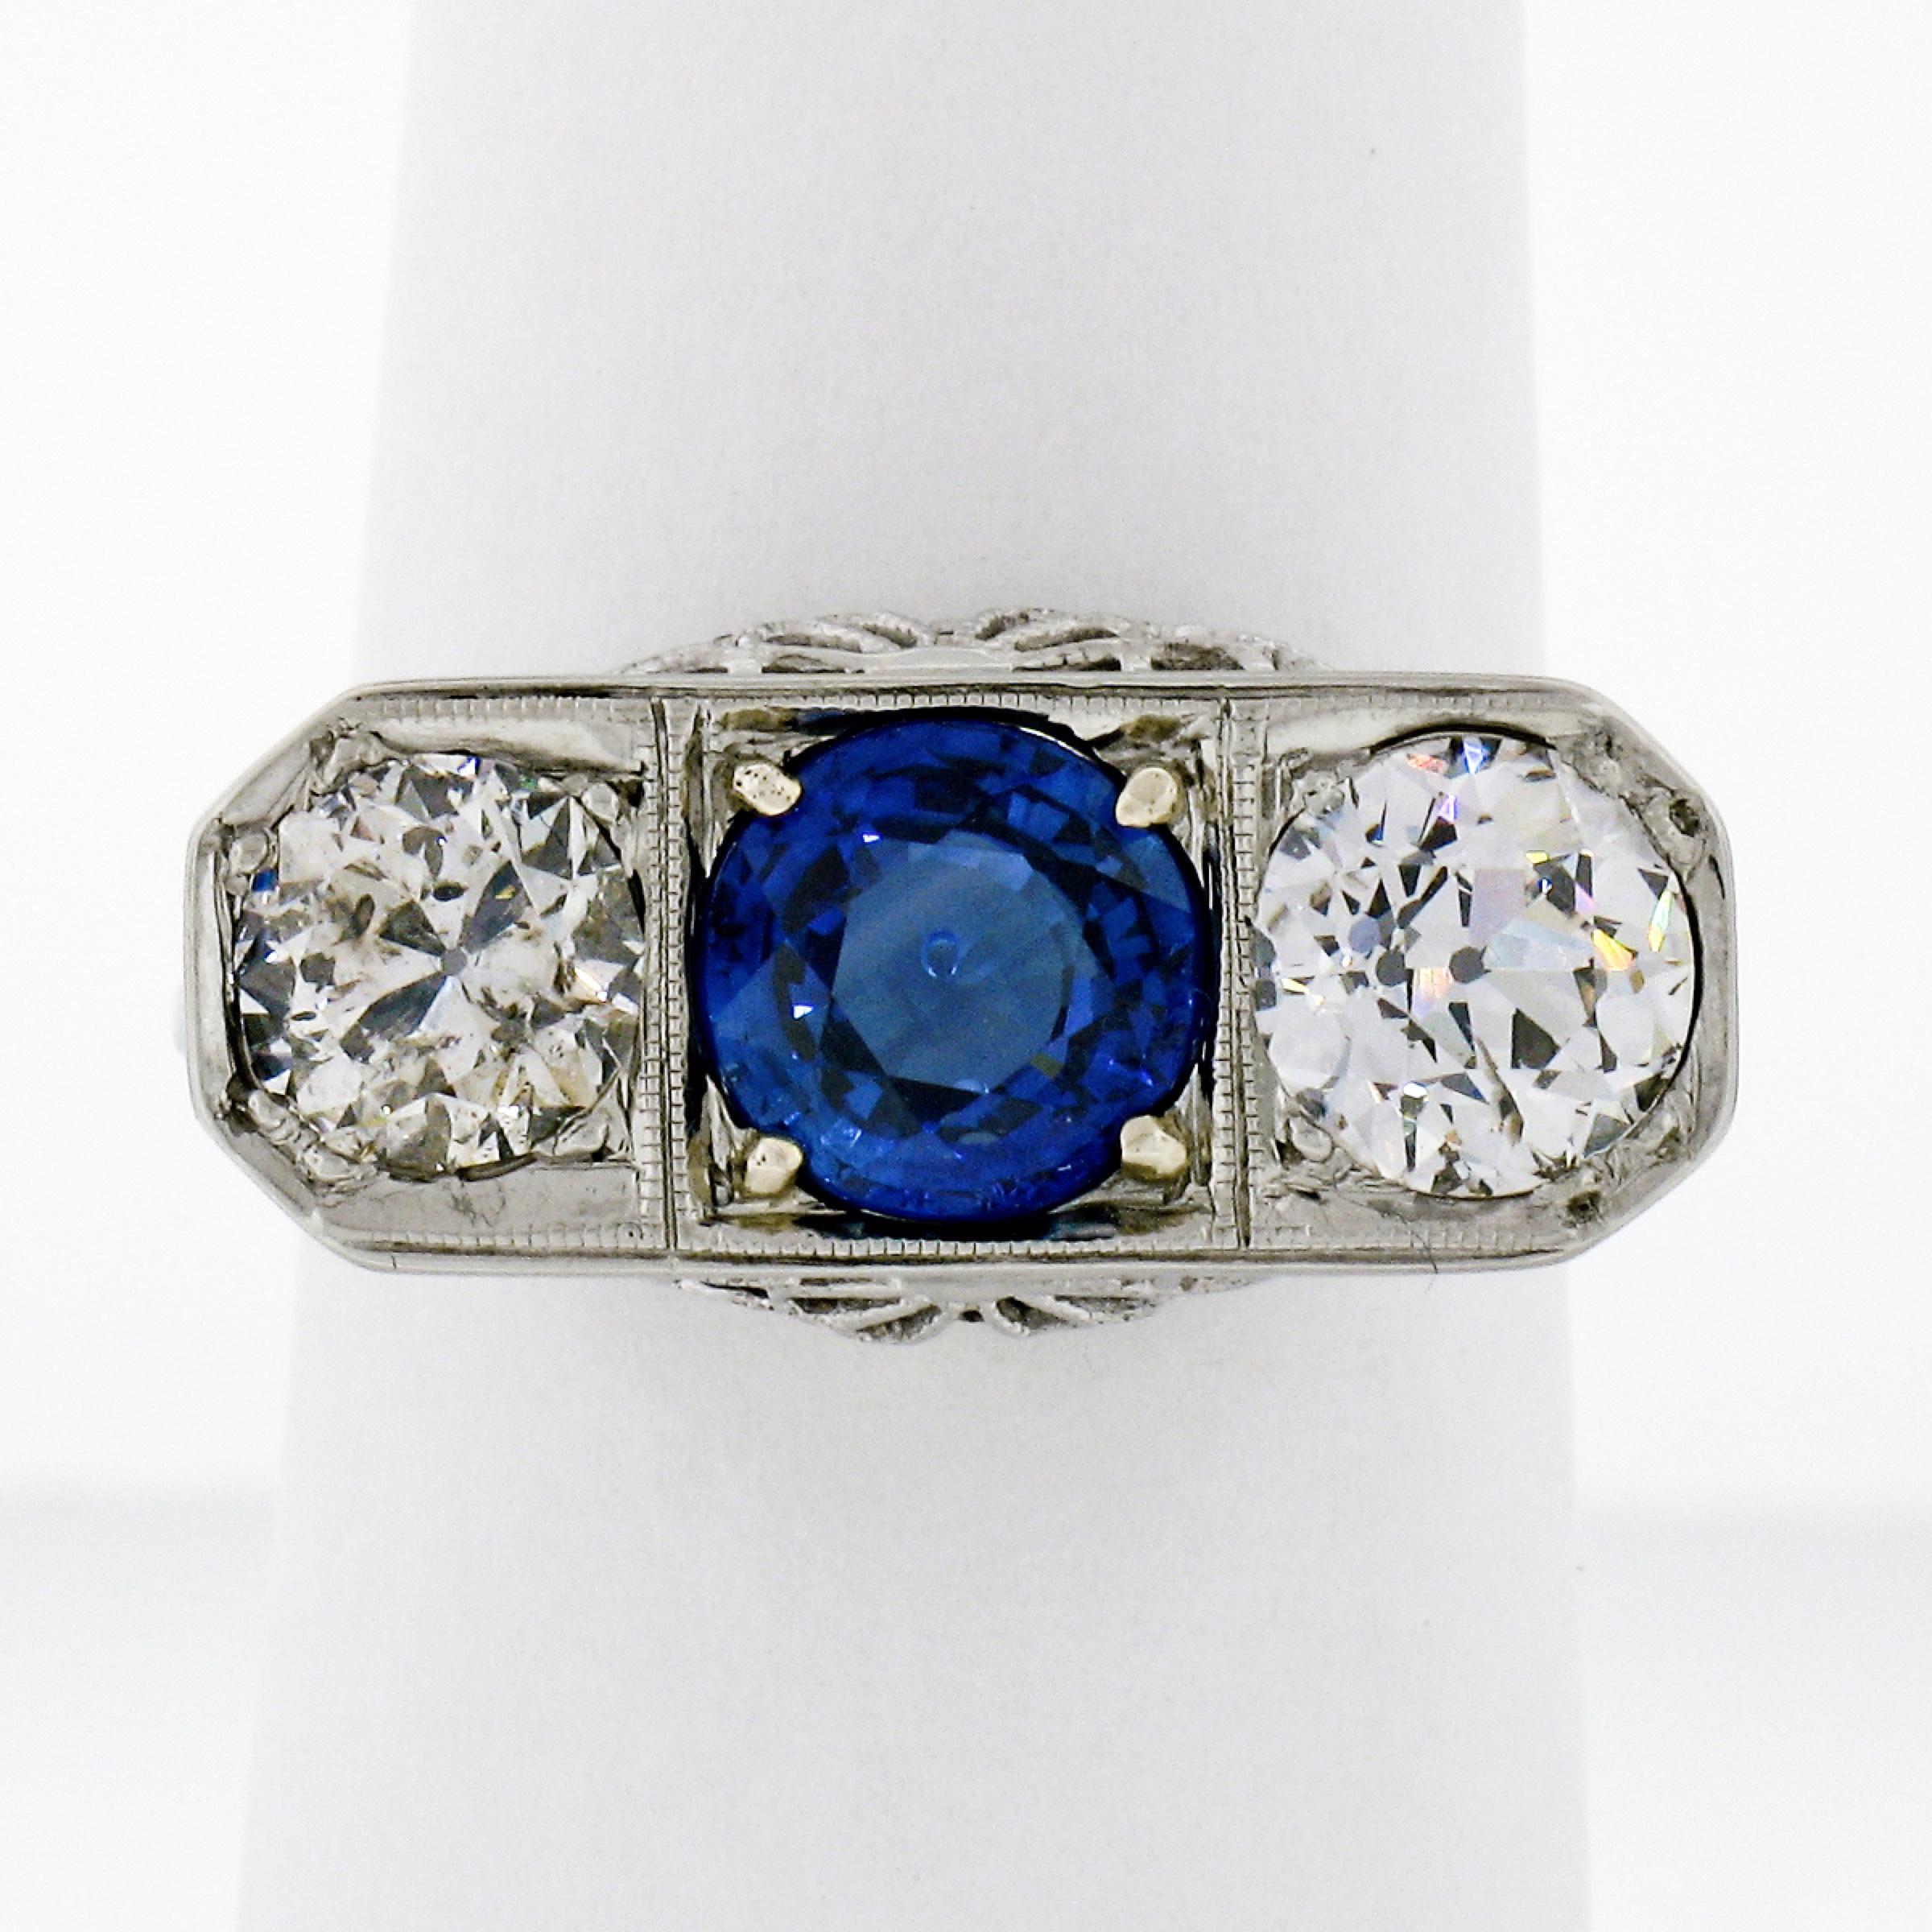 This gorgeous, all original antique three stone ring was crafted in solid 18k white gold during the art deco period and features a stunning, GIA certified, 1.55 carat round brilliant cut natural sapphire stone. The sapphire displays the richest and